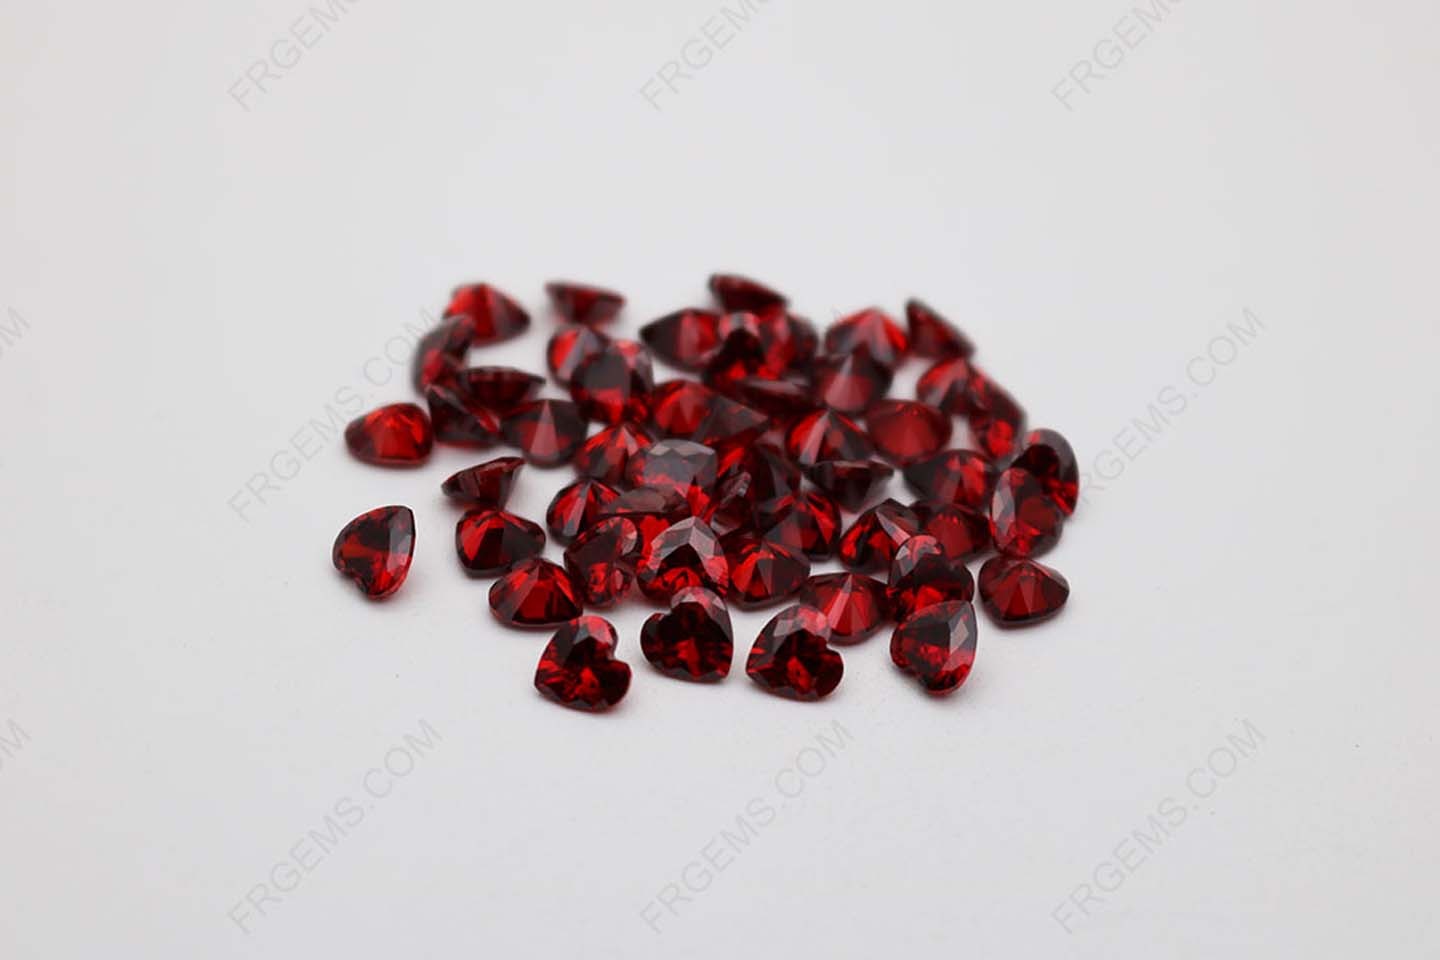 Cubic_Zirconia_Garnet_Red_Heart_Shape_Faceted_Cut_6x6mm_stones_IMG_1325